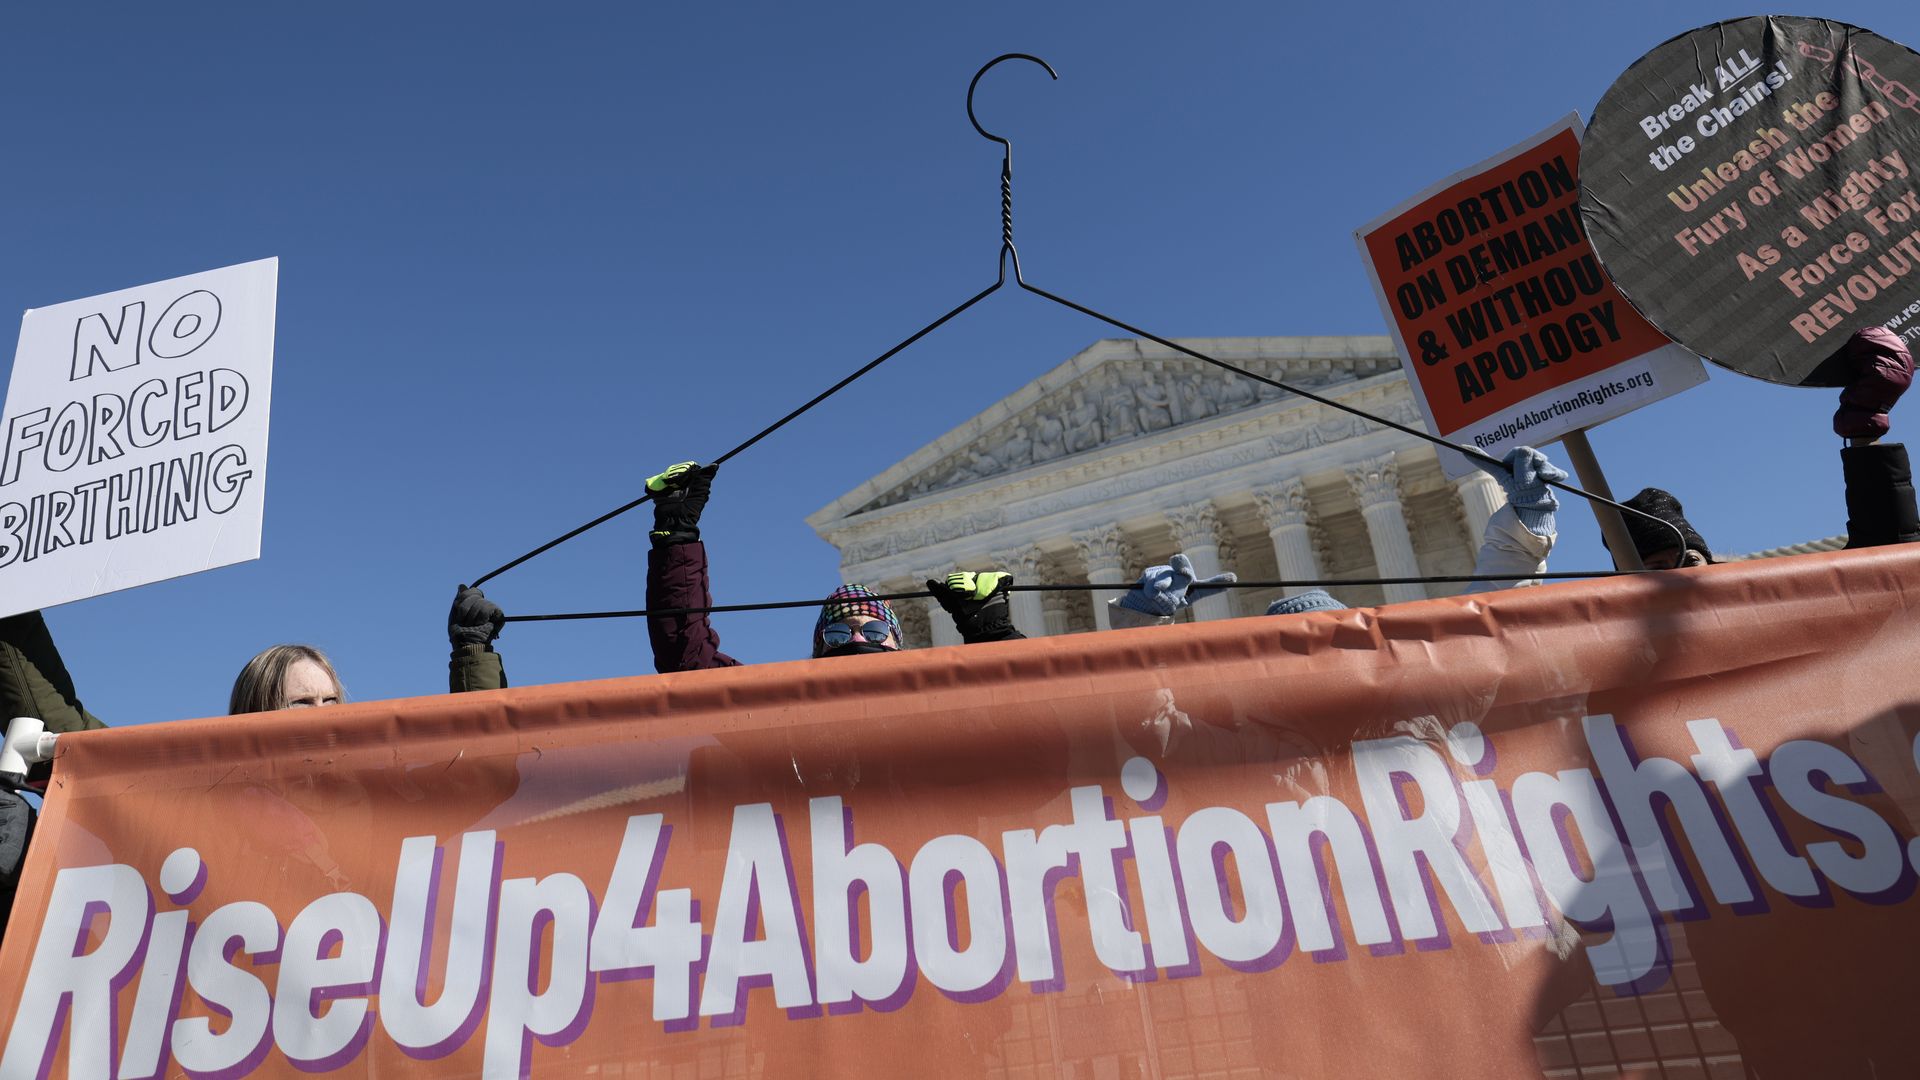 Photo of protesters holding an orange banner that says "RiseUp4AbortionRights"